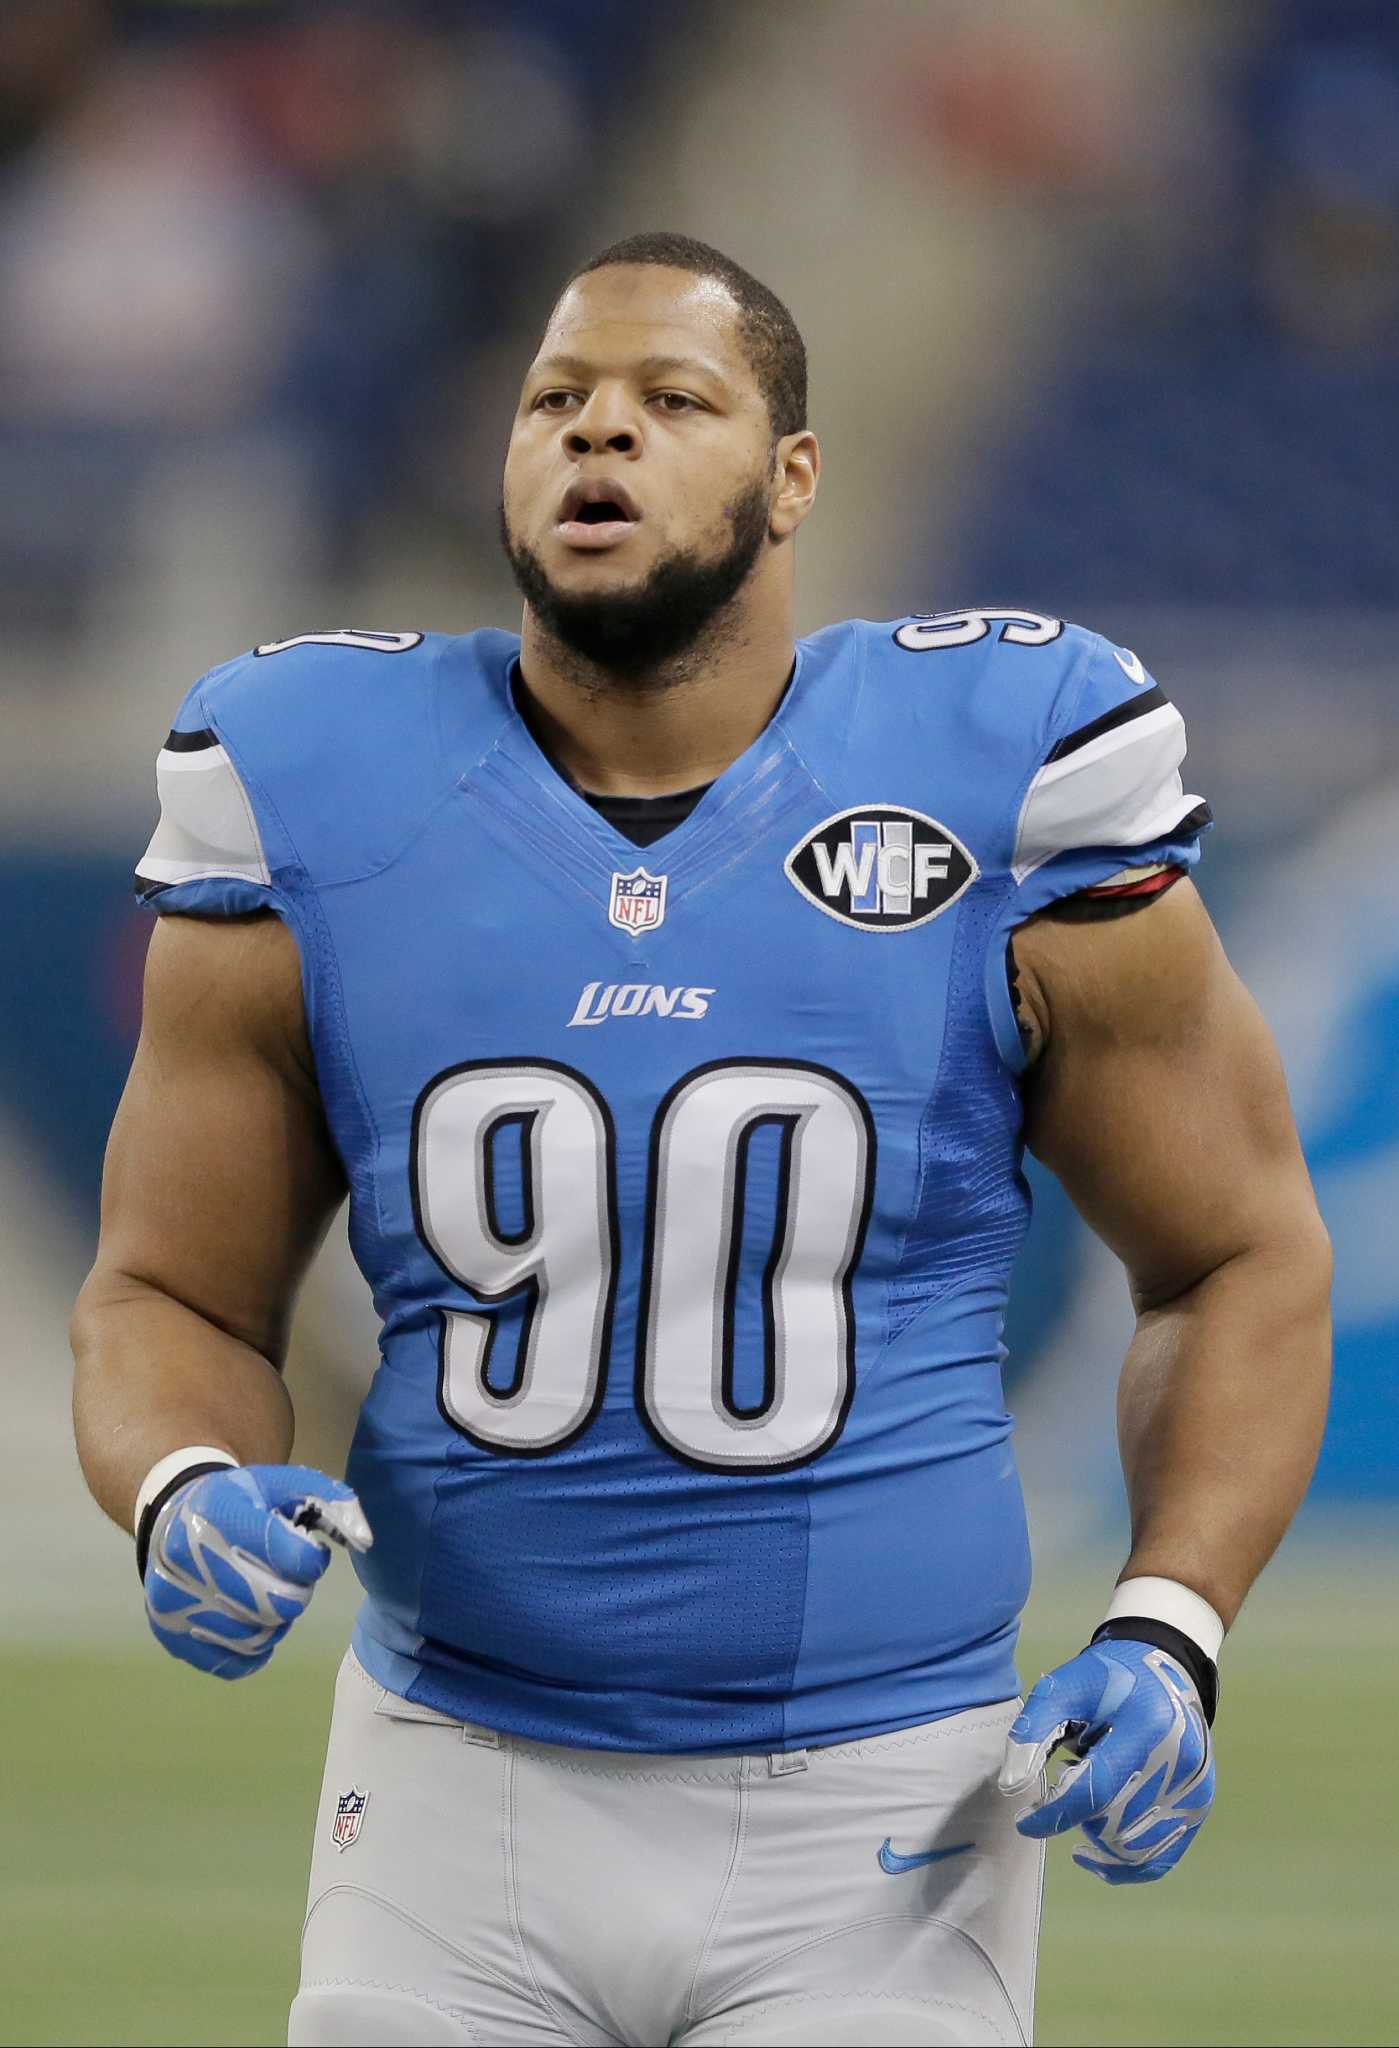 NFL Suh wins appeal, will play against Cowboys